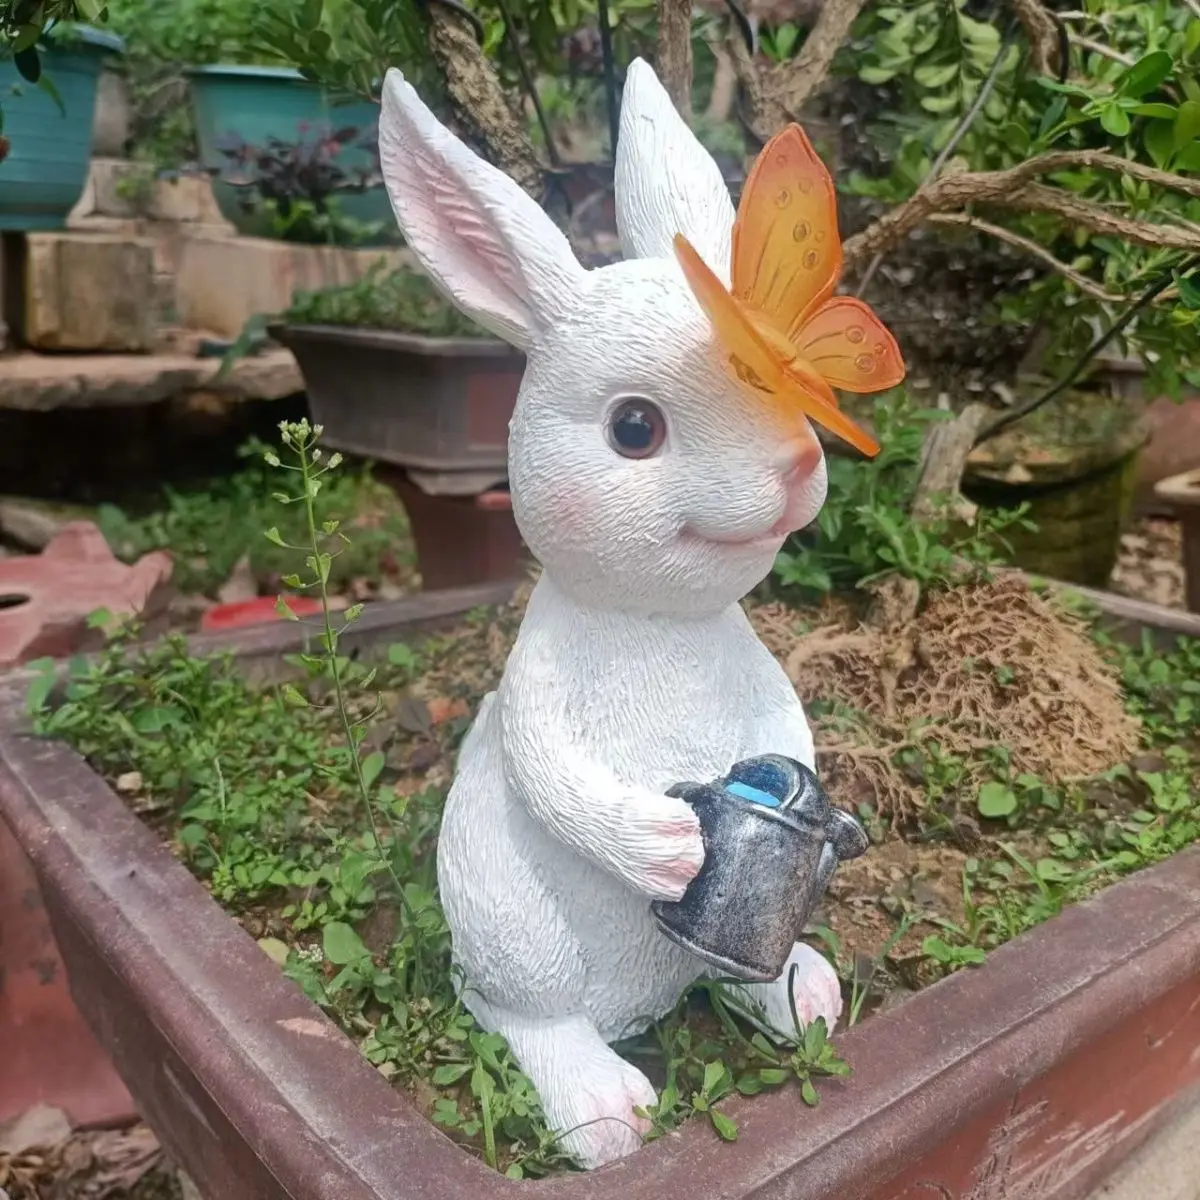 

Take the Kettle Top Butterfly Solar Light Rabbit Resin Ornaments Outdoor Garden Figurines Crafts Balcony Lawn Sculpture Decor